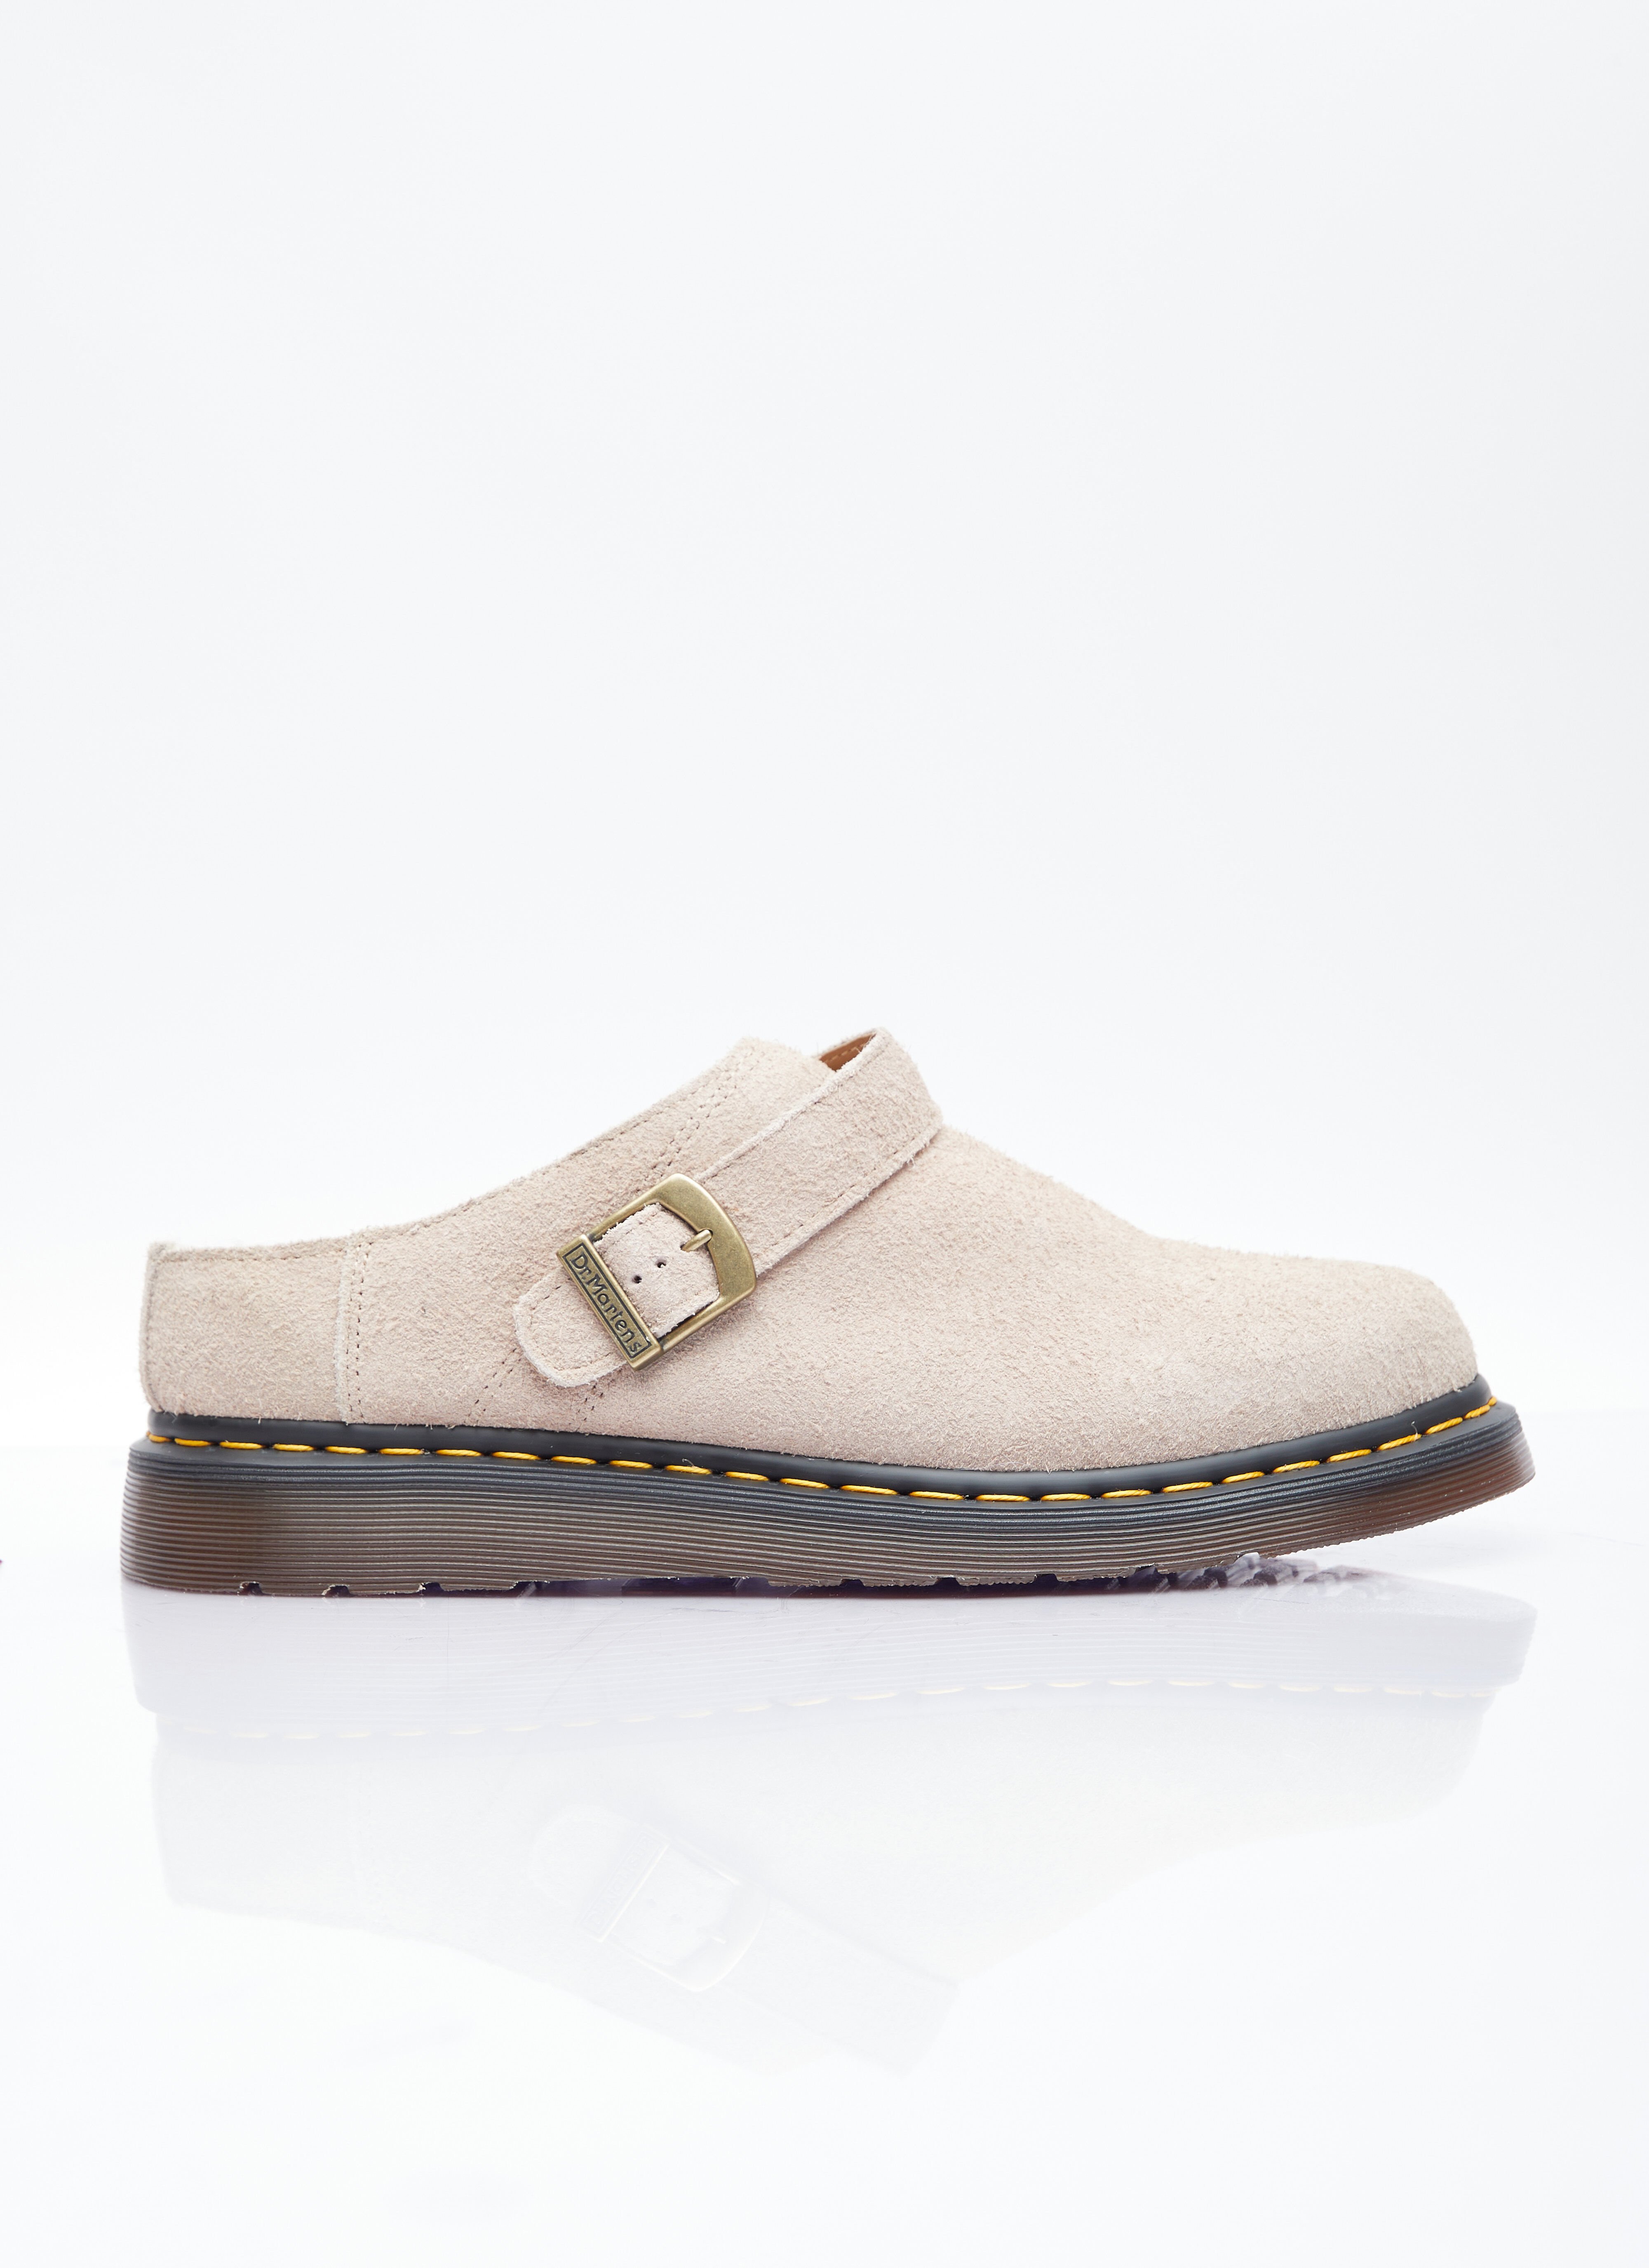 Dr. Martens Isham Suede Mules Green drm0156002